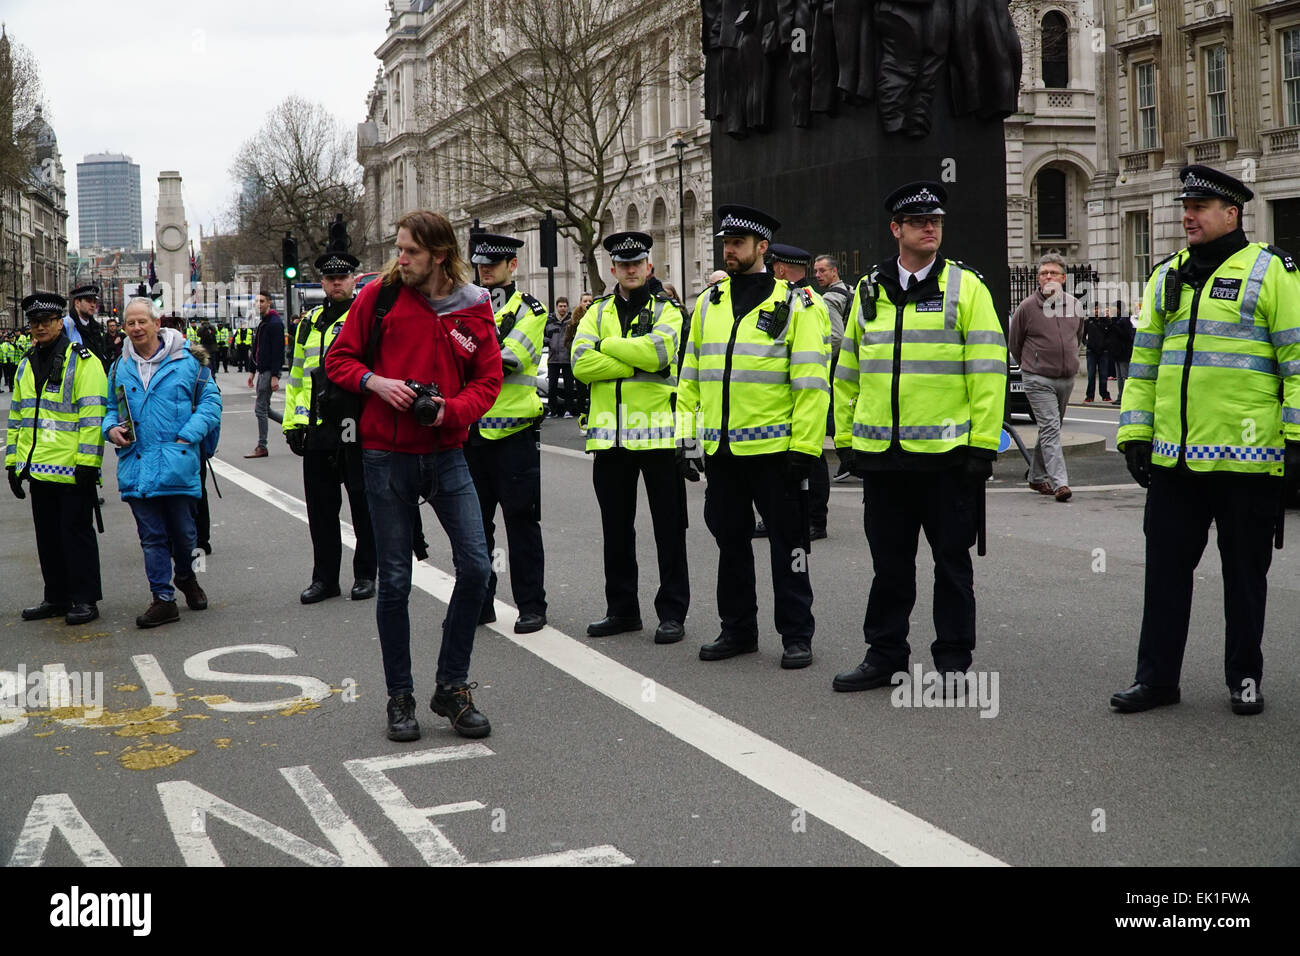 London, UK, 4th April, 2015. Anti-Fascist Bloc assembly at Trafalgar square then march to Whitehall counter attack with The English version of Pegida, the anti-Islam movement that originated in Germany, but were opposed by a larger anti-racist protest staged by the Unite Against Fascism (UAF) group.. . Photo by See Li Stock Photo